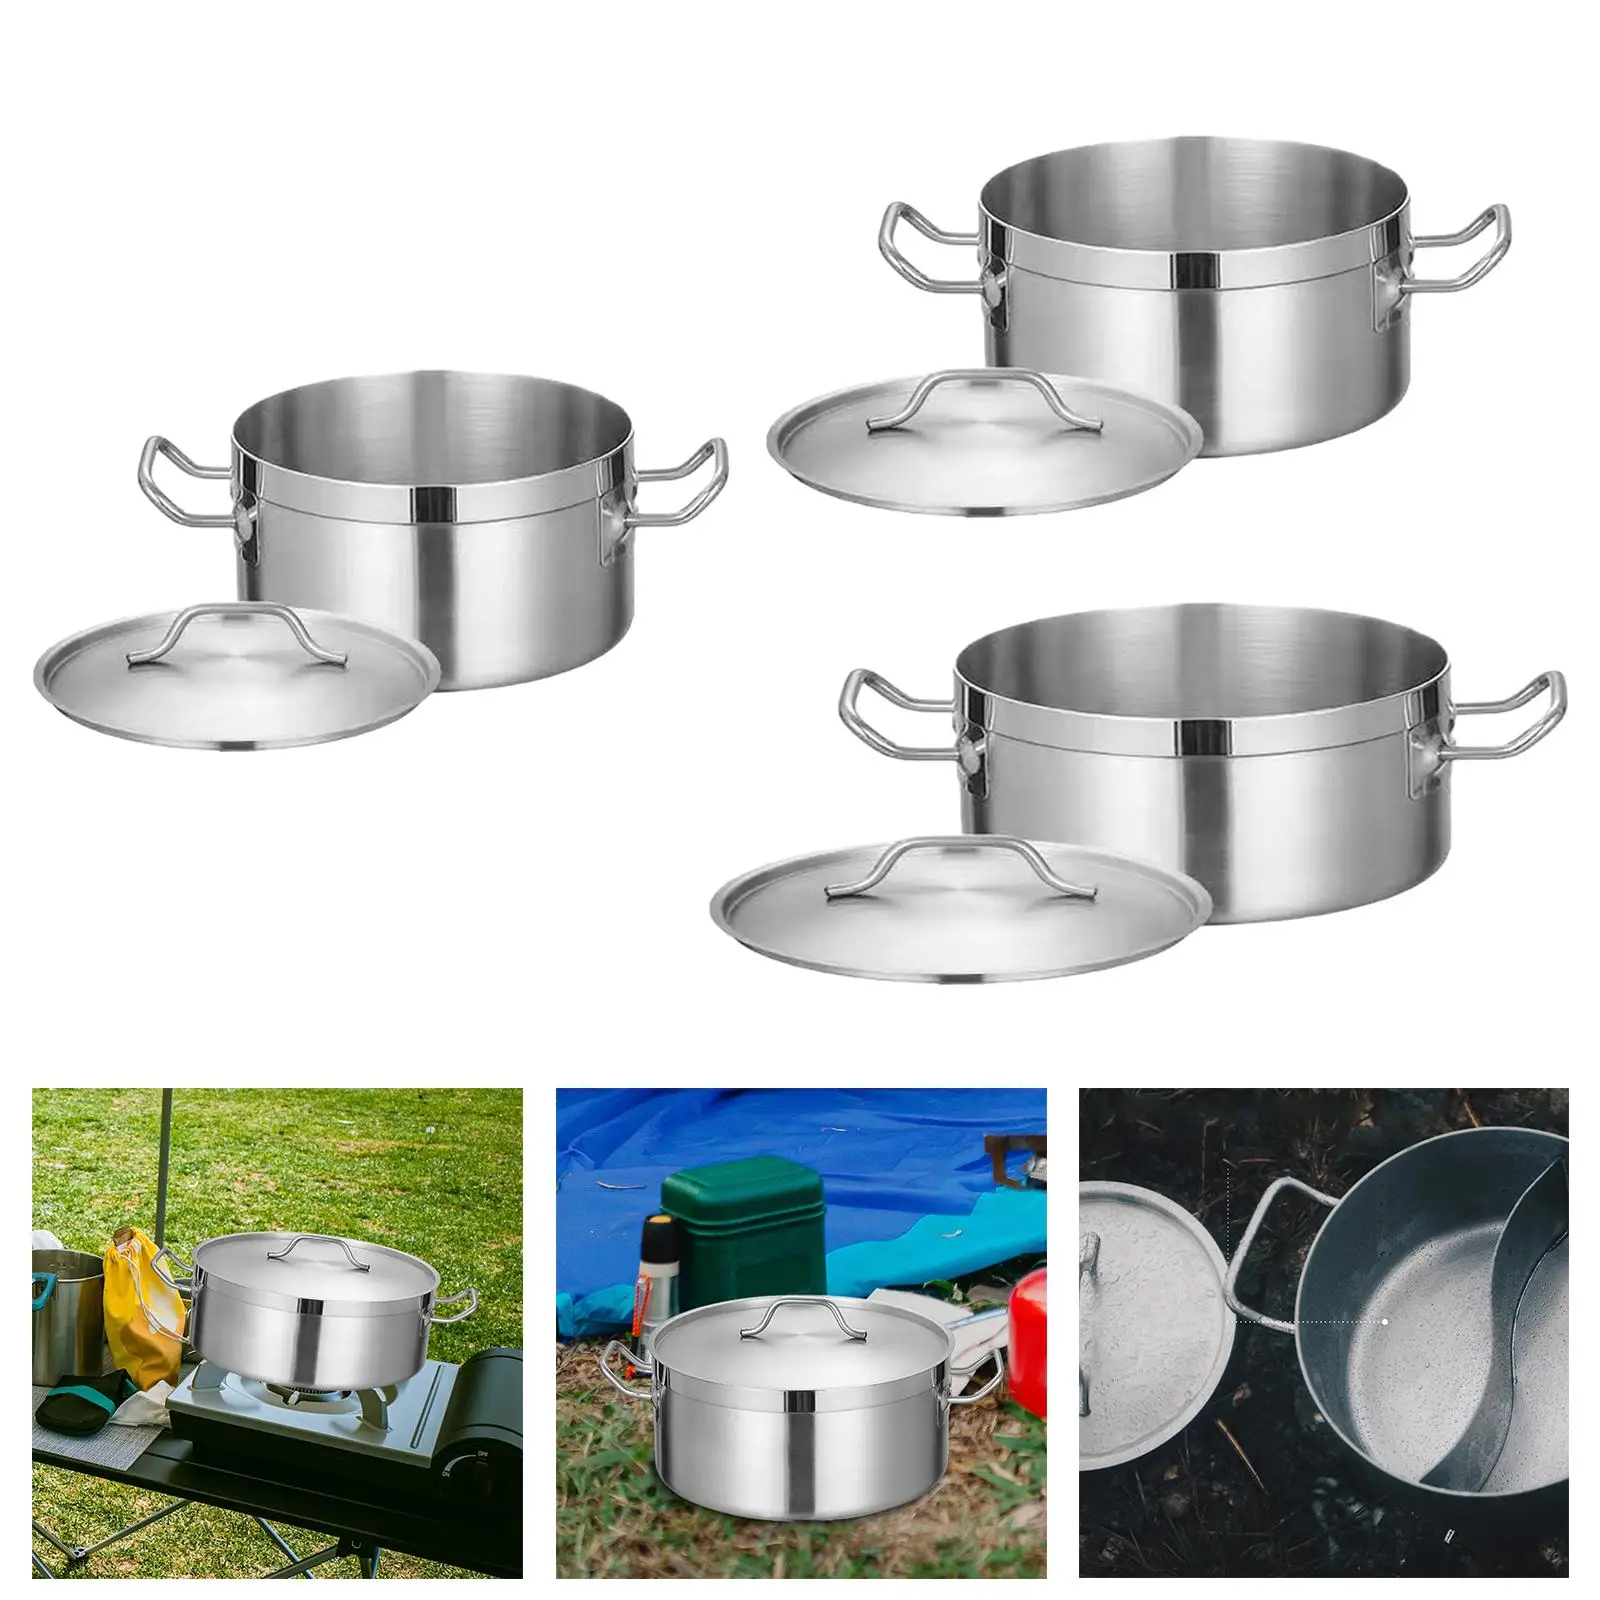 Stainless Steel Stockpot Deep Pot Casserole Pot with Lid Induction Pot Soup Pot for Kitchen Commercial Household Outdoor Camping